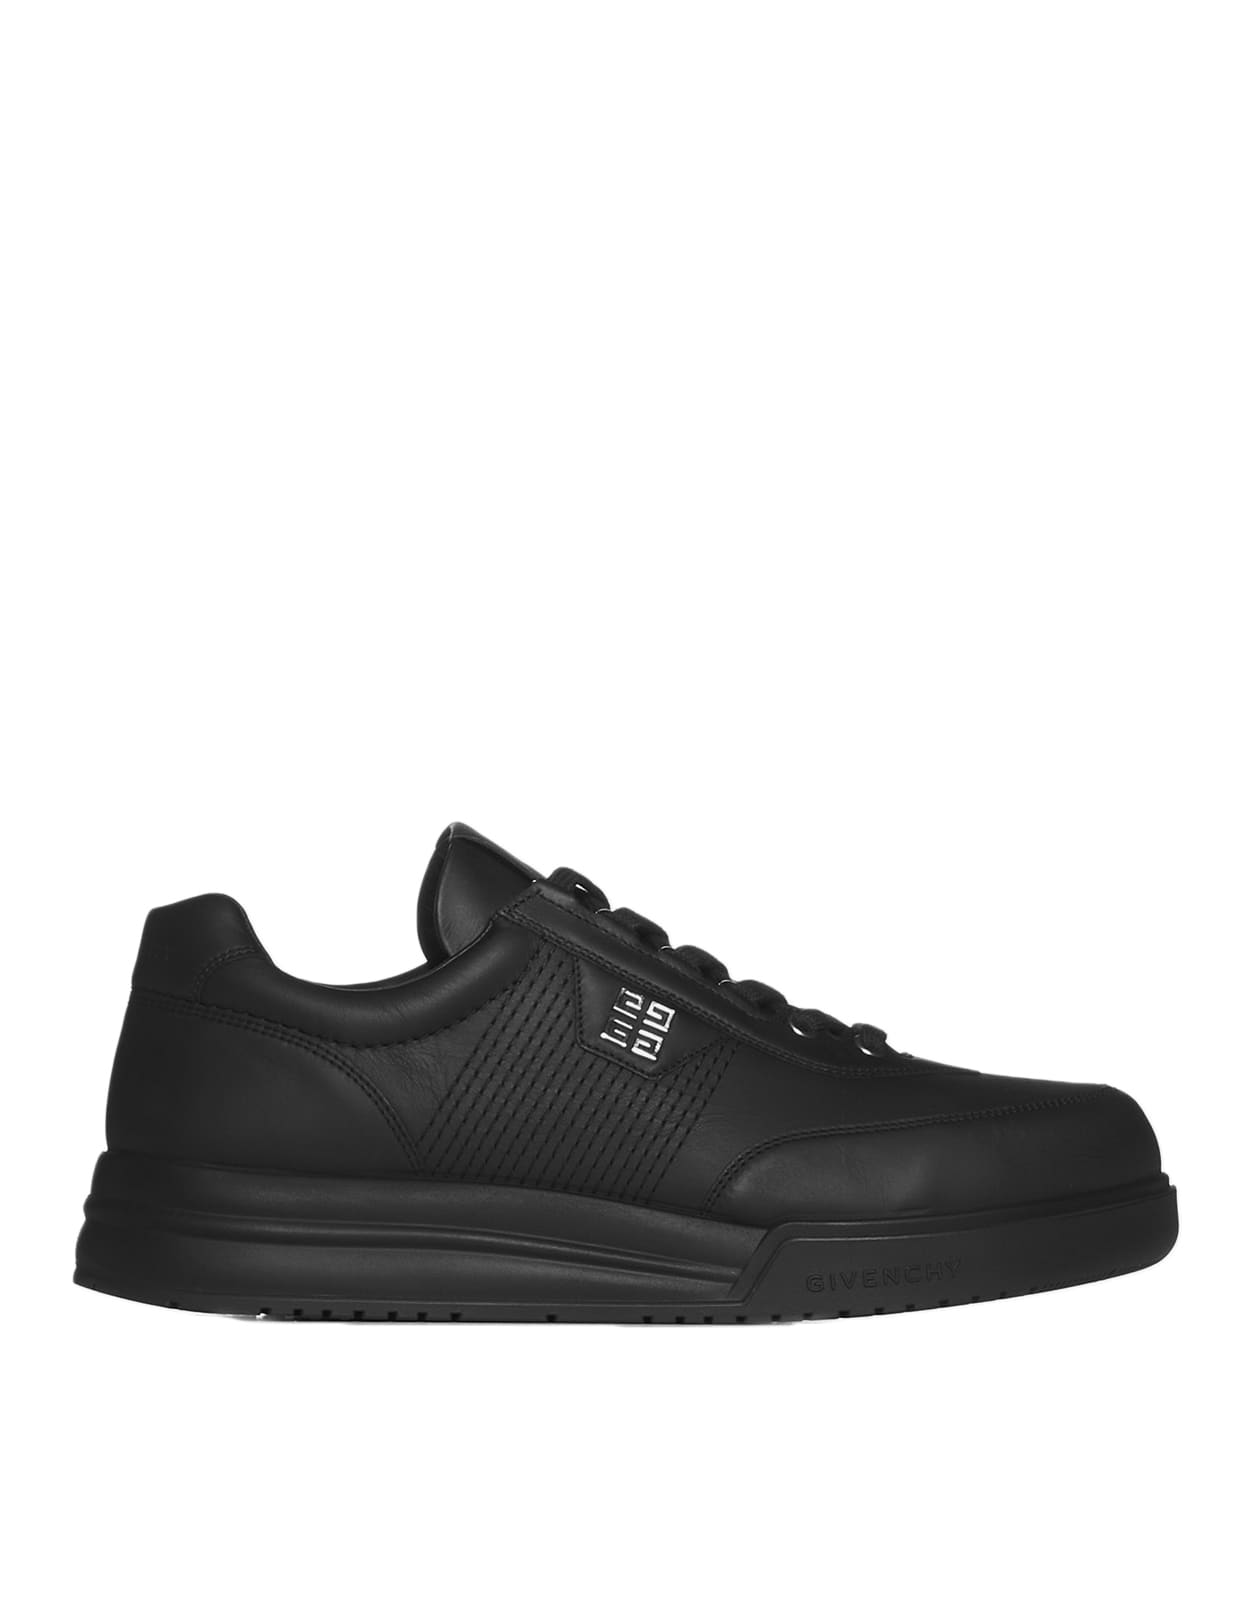 GIVENCHY MAN G4 SNEAKERS IN BLACK LEATHER